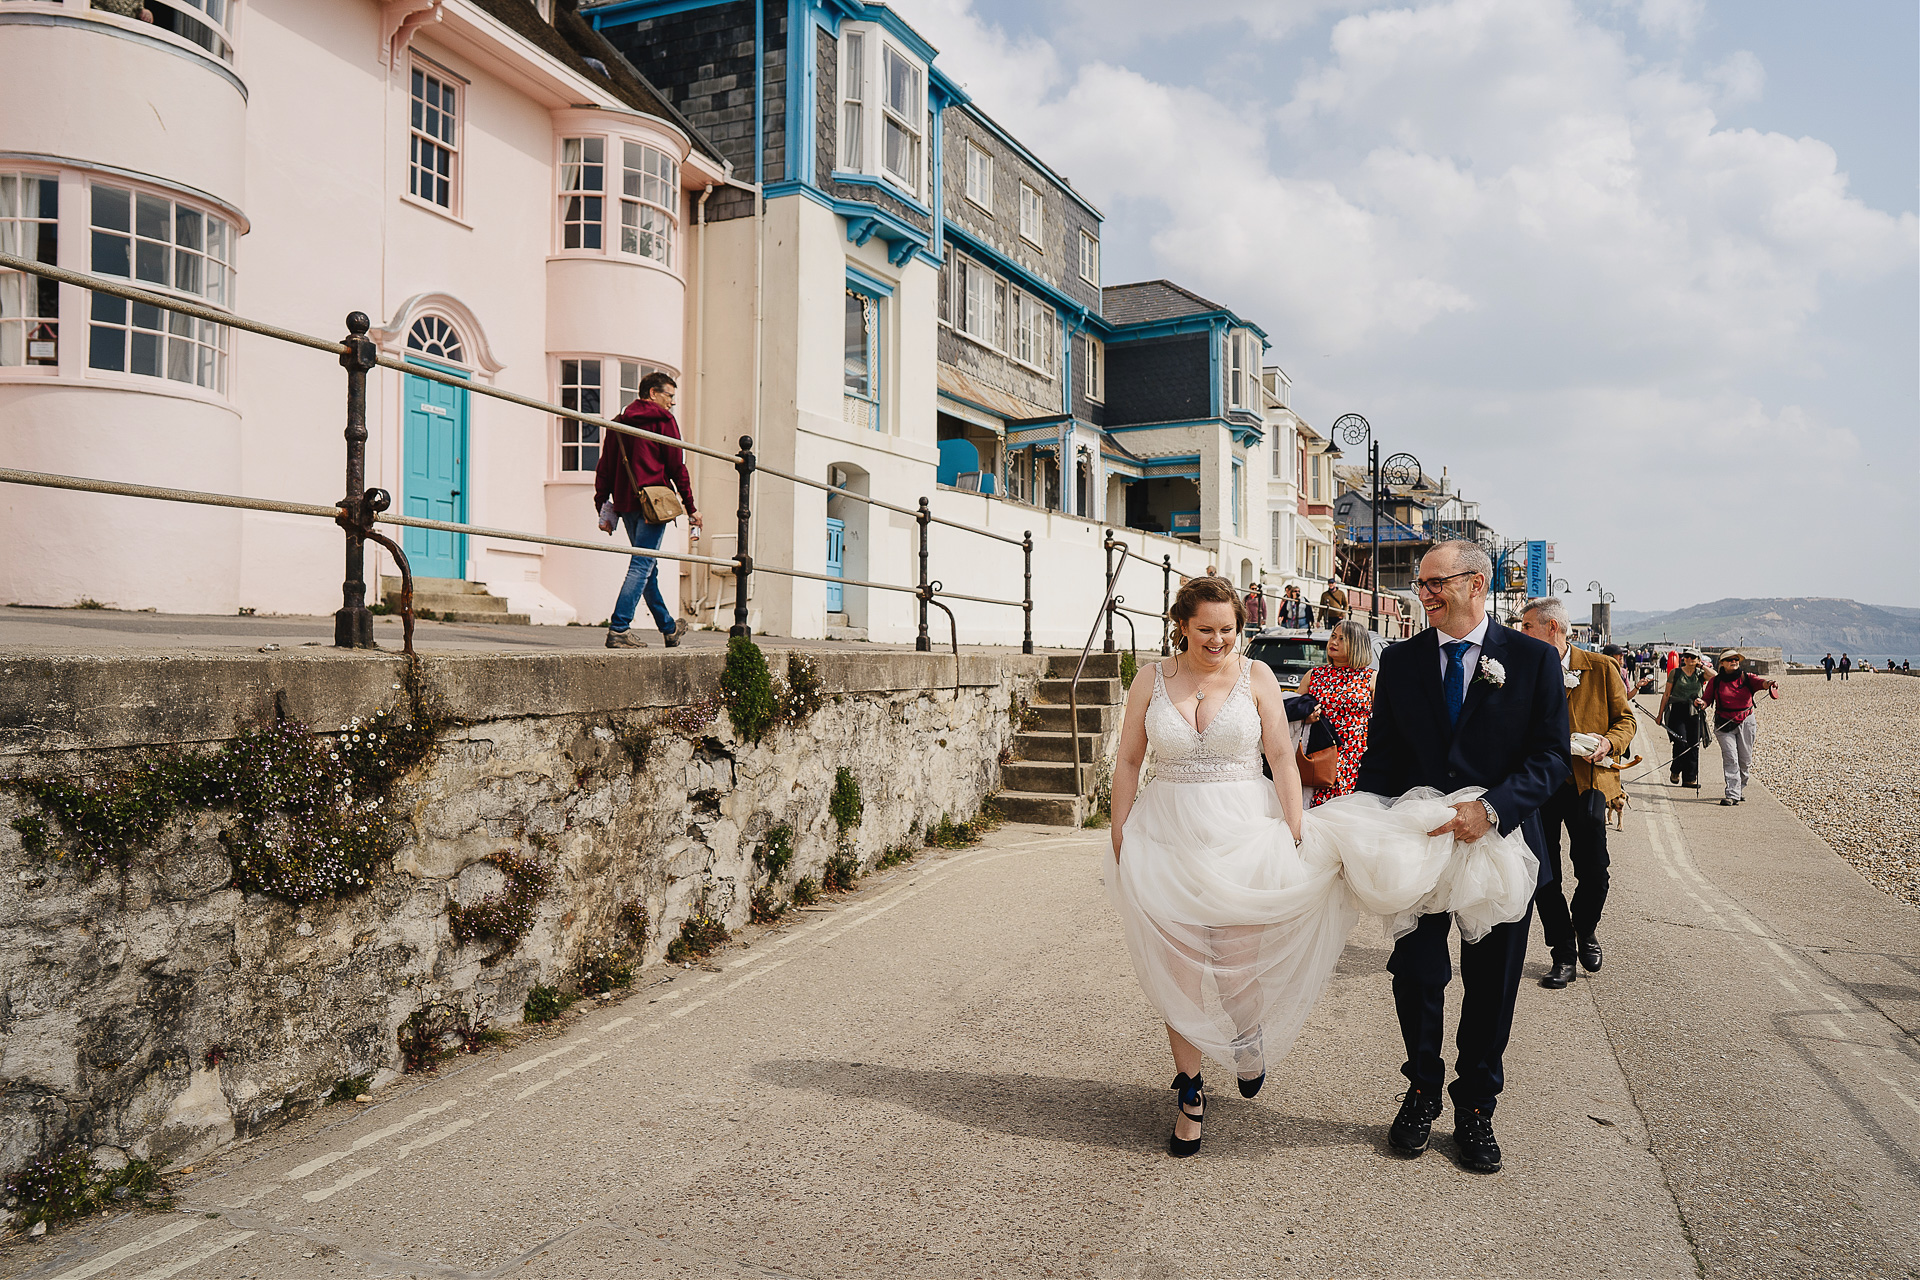 Elopement wedding by the sea, bride and groom walking along the seafront